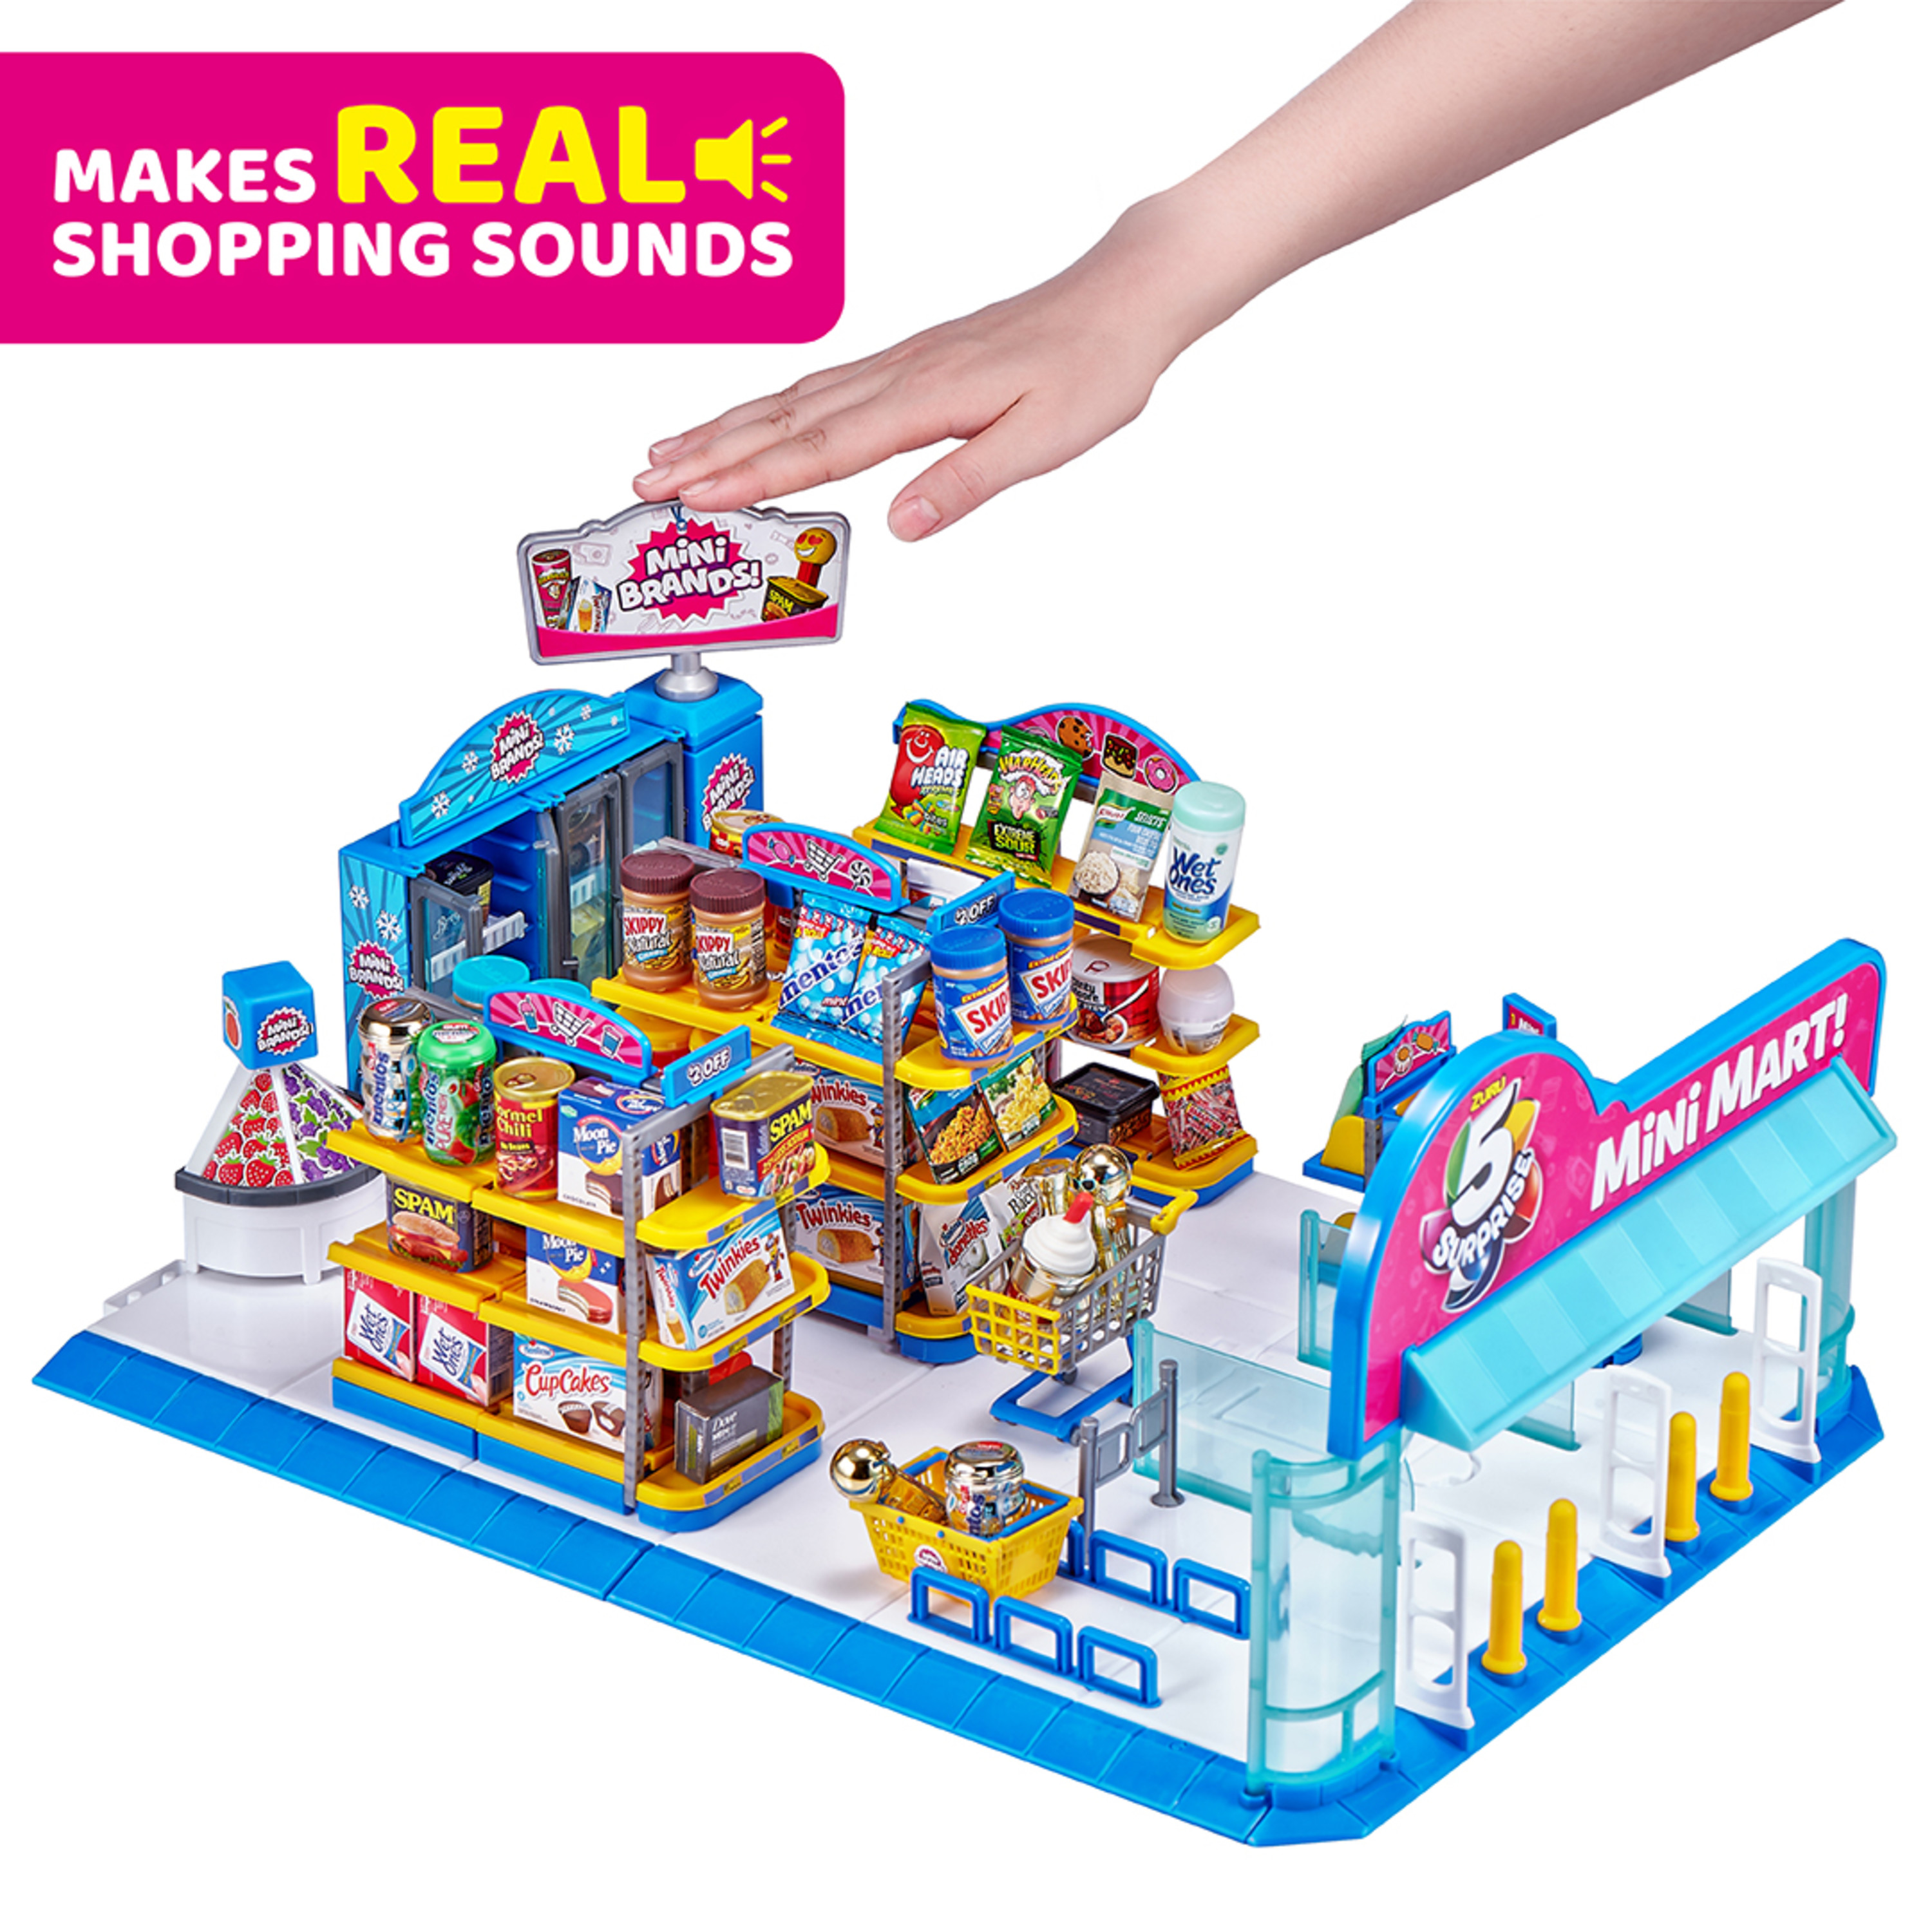 5 Surprise Mini Brands Series 2 Electronic Mini Mart with 4 Mystery Mini Brands Playset by ZURU - image 5 of 11